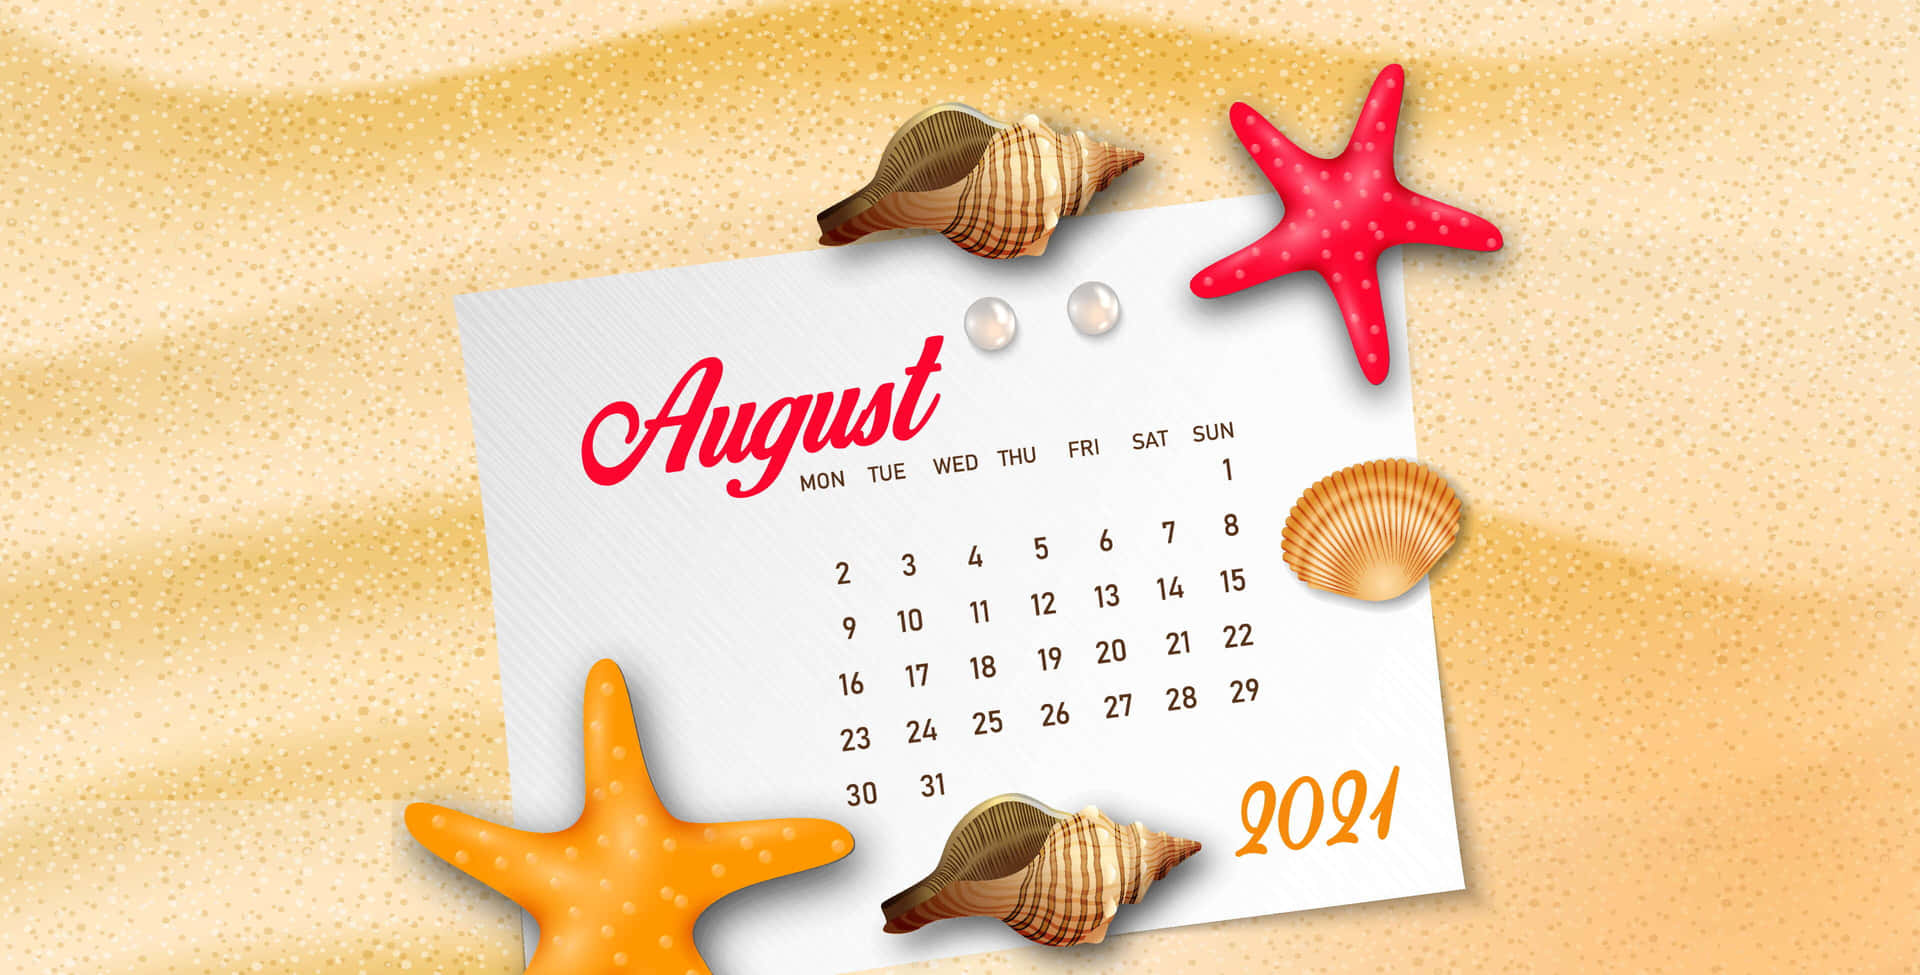 August is a time for family, friends, and fun in the sun.